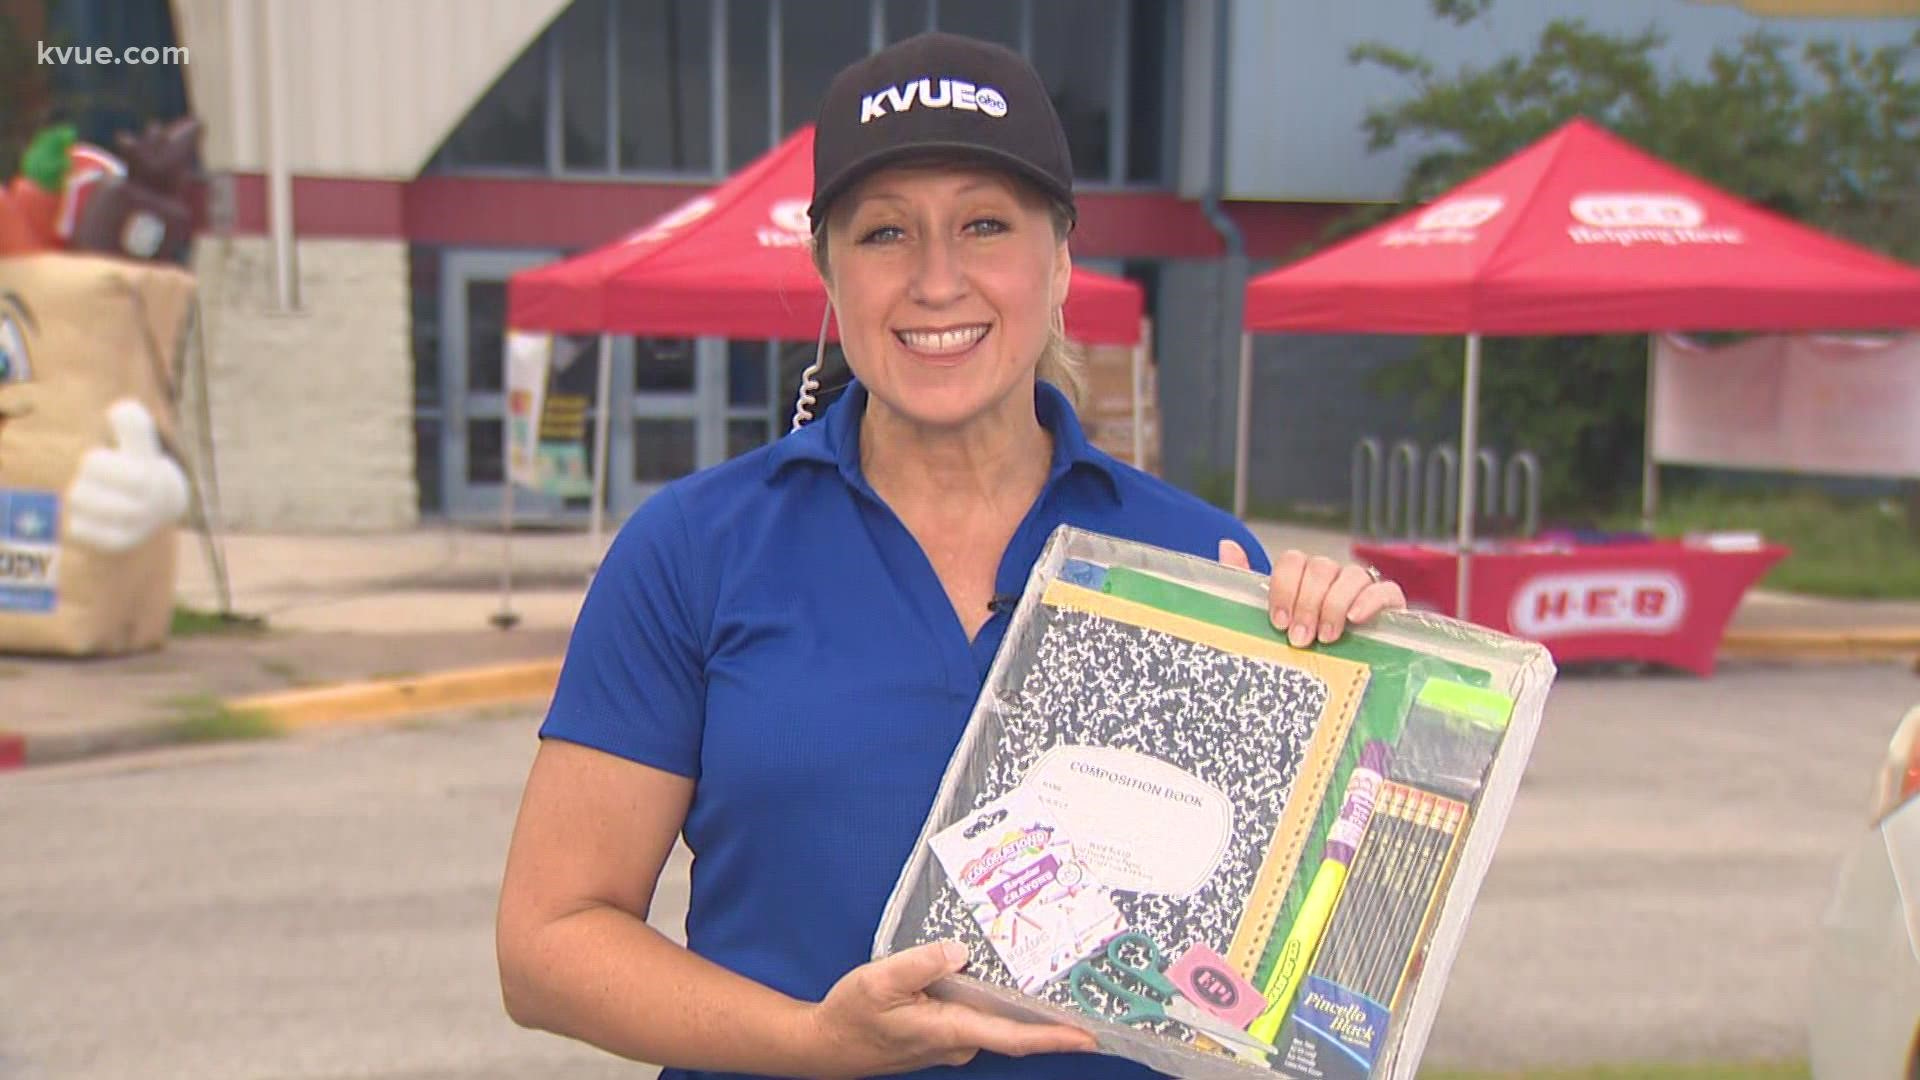 The community is stepping up for children who need school supplies for the upcoming school year.